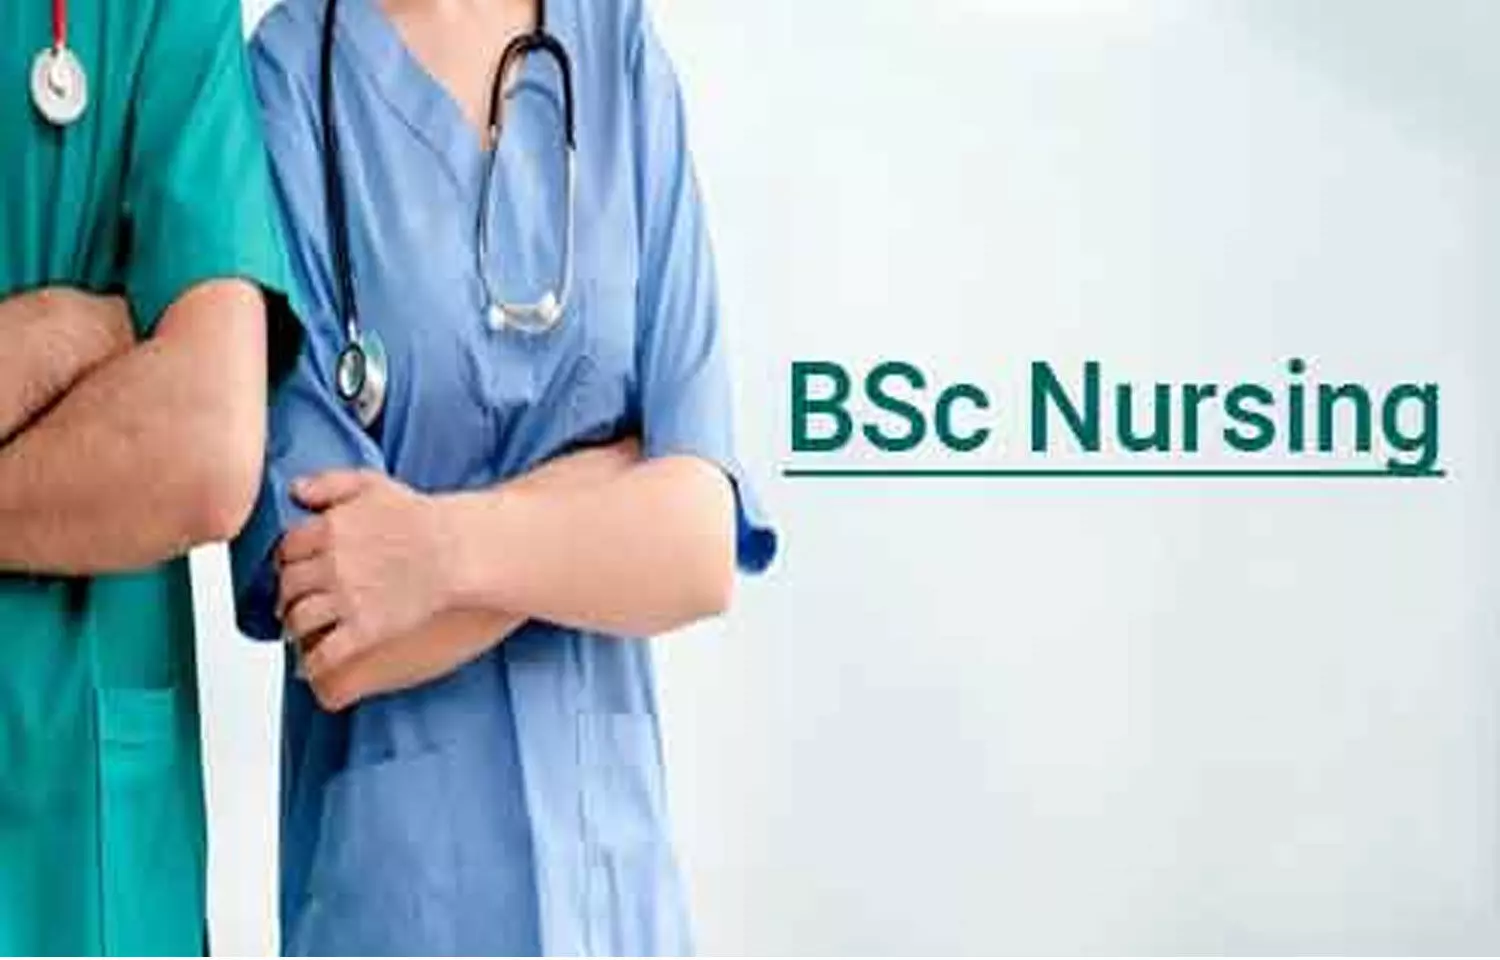 JIPMER informs on commencement of offline classes for BSc Nursing II, III & IV year students